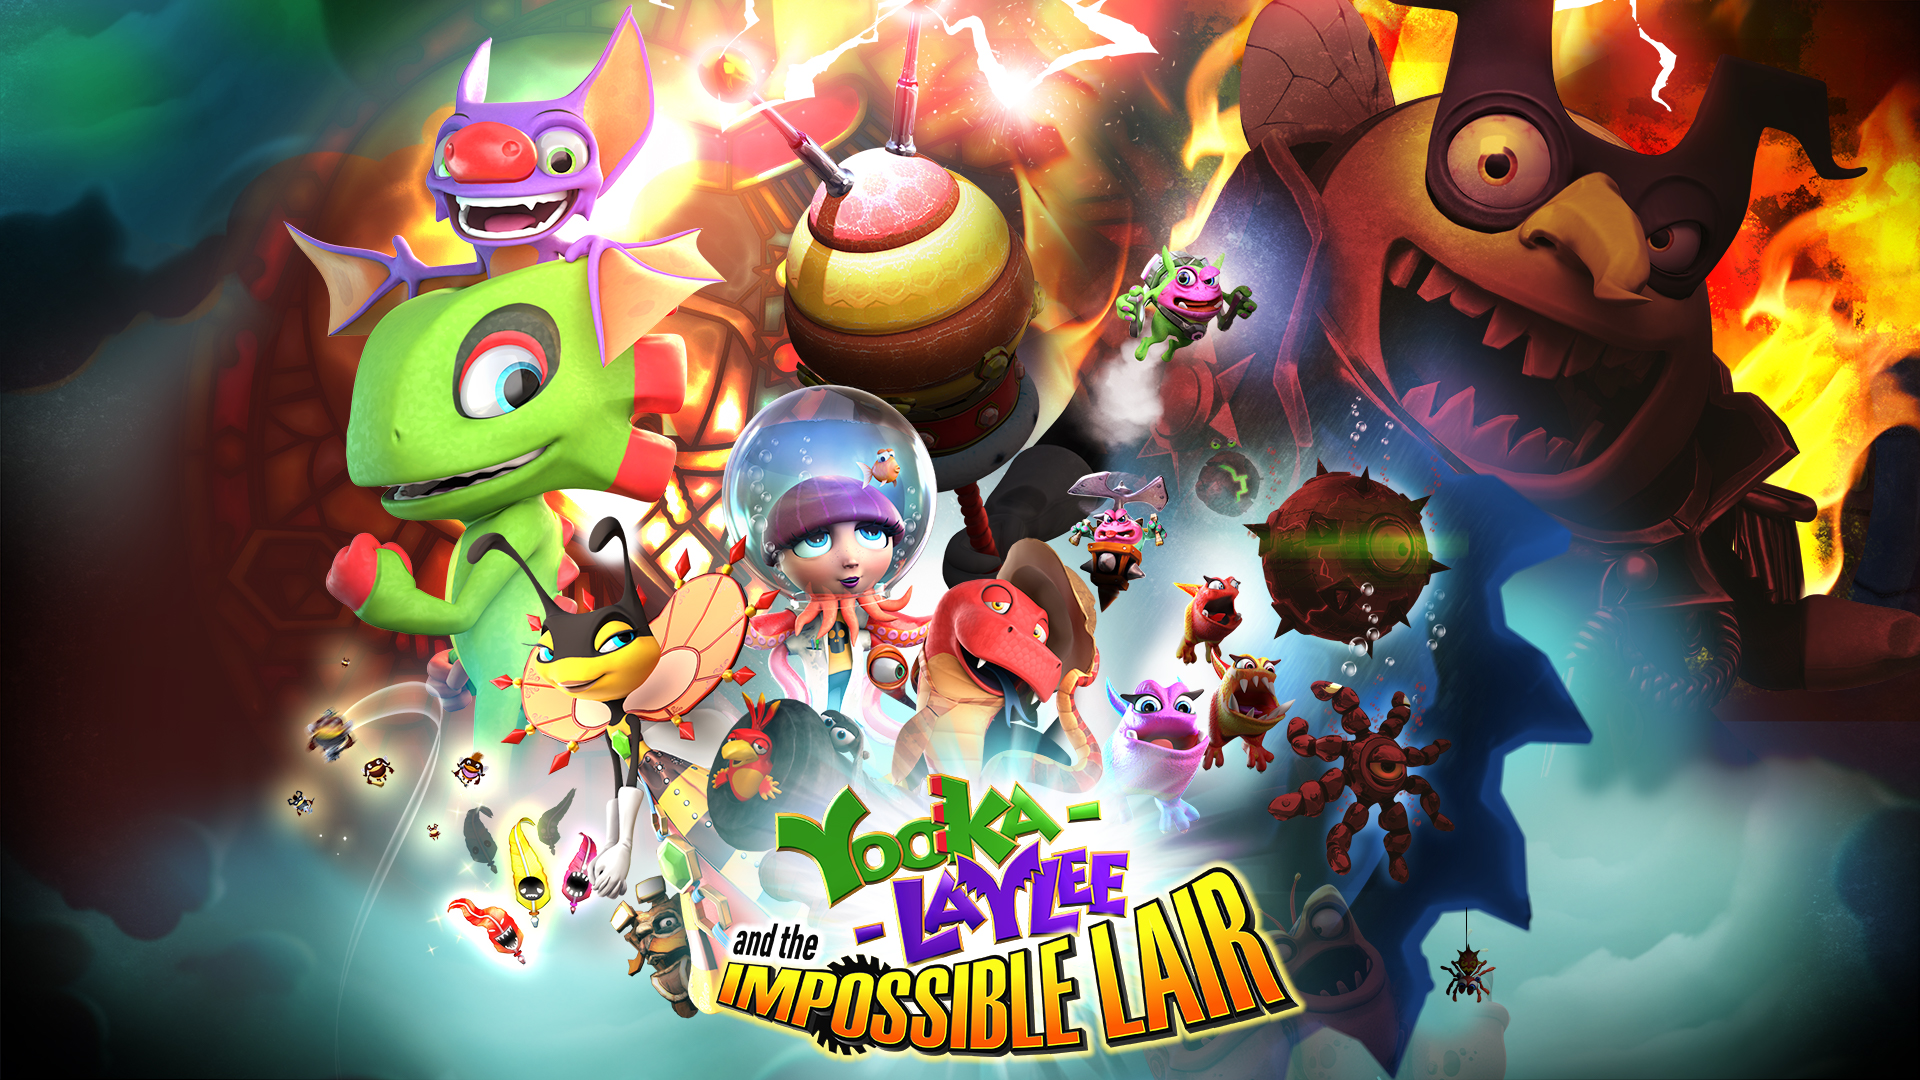 Yooka-Laylee and the Impossible Lair Update Out Today & Original Yooka- Laylee Update Soon! - Team17 Digital LTD - The Spirit Of Independent Games